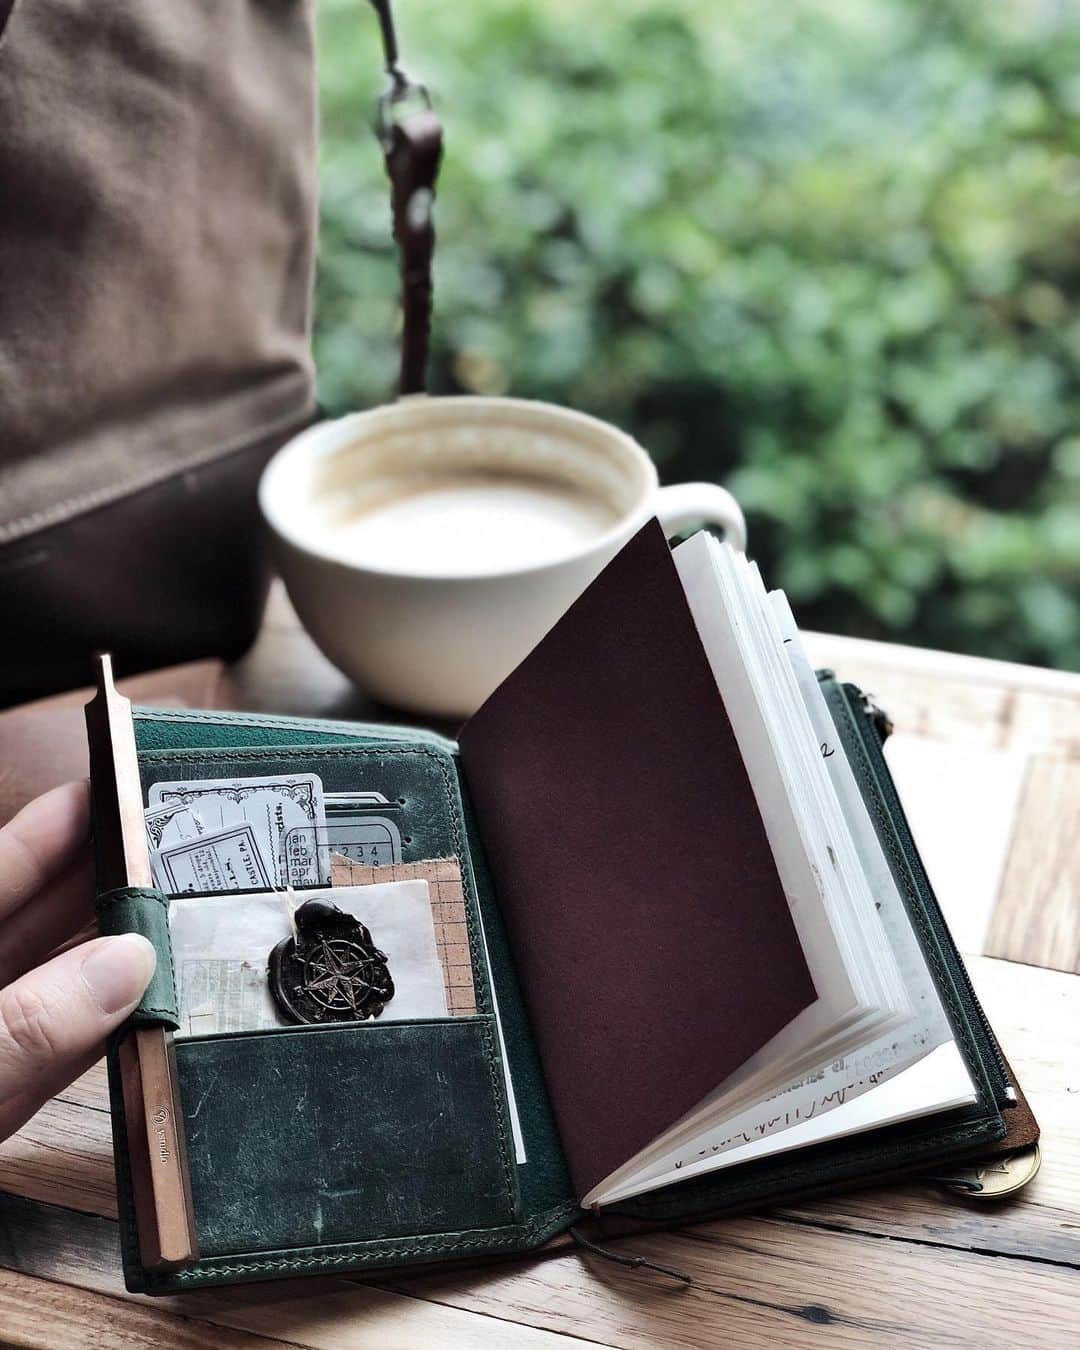 Catharine Mi-Sookさんのインスタグラム写真 - (Catharine Mi-SookInstagram)「Today is for quiet. And raindrops. Good coffee, journaling, and enjoying a slower pace. Today is for rest. And gratitude. Moments, loved ones and plenty of reflection. From my mug to yours, cheers to your day. I hope this Sunday refreshes the palette and brings each of you an inspiring week ahead. . . . “When you rise in the morning, give thanks for the light, for your life, for your strength. Give thanks for your food and for the joy of living. If you see no reason to give thanks, the fault lies in yourself.” -Tecumseh . . . A happy new addition to my EDC: the Hamilton sunnies by @randolph.usa. A new geometric shape from the reinvention of their two retired styles, Jefferson and Franklin. Their featherweight SkyForceTM lenses feature Polarization, Anti-Reflective and Oleophobic coatings. I chose the Autumn Sunset color, which gives a warm grey viewing experience. Oh and my favorite detail: my name custom engraved on the arms! A big thank you to #veteranownedbusiness @randolph.usa for sending these beauties my way! . . . Also featuring my tried and true portable copper @ystudiostyle fountain pen from @koheziamsterdam. TN Passport @nomadostore. Leather Student Pencil Case & Passport Wallet @galen_leather. Field Bag in Newcastle (and on sale!) @woodandfaulk. . . . #myrandolphs #sunnies #sunglassesfashion #journaling #ystudio #fountainpens #penmanship #midoripassport #nomadostore #トラベラーズノート #galenleather #leathercraft #woodandfaulk #whatsinmybag #creativejournal #dailyjournal #stationery #stationerylove #handsinframe #coffeeshopvibes #coffeenclothes #moodygram #creativespace #aquietstyle #plannercommunity #thedailywriting #midoritravelersnotebook」7月8日 3時56分 - catharinemisook